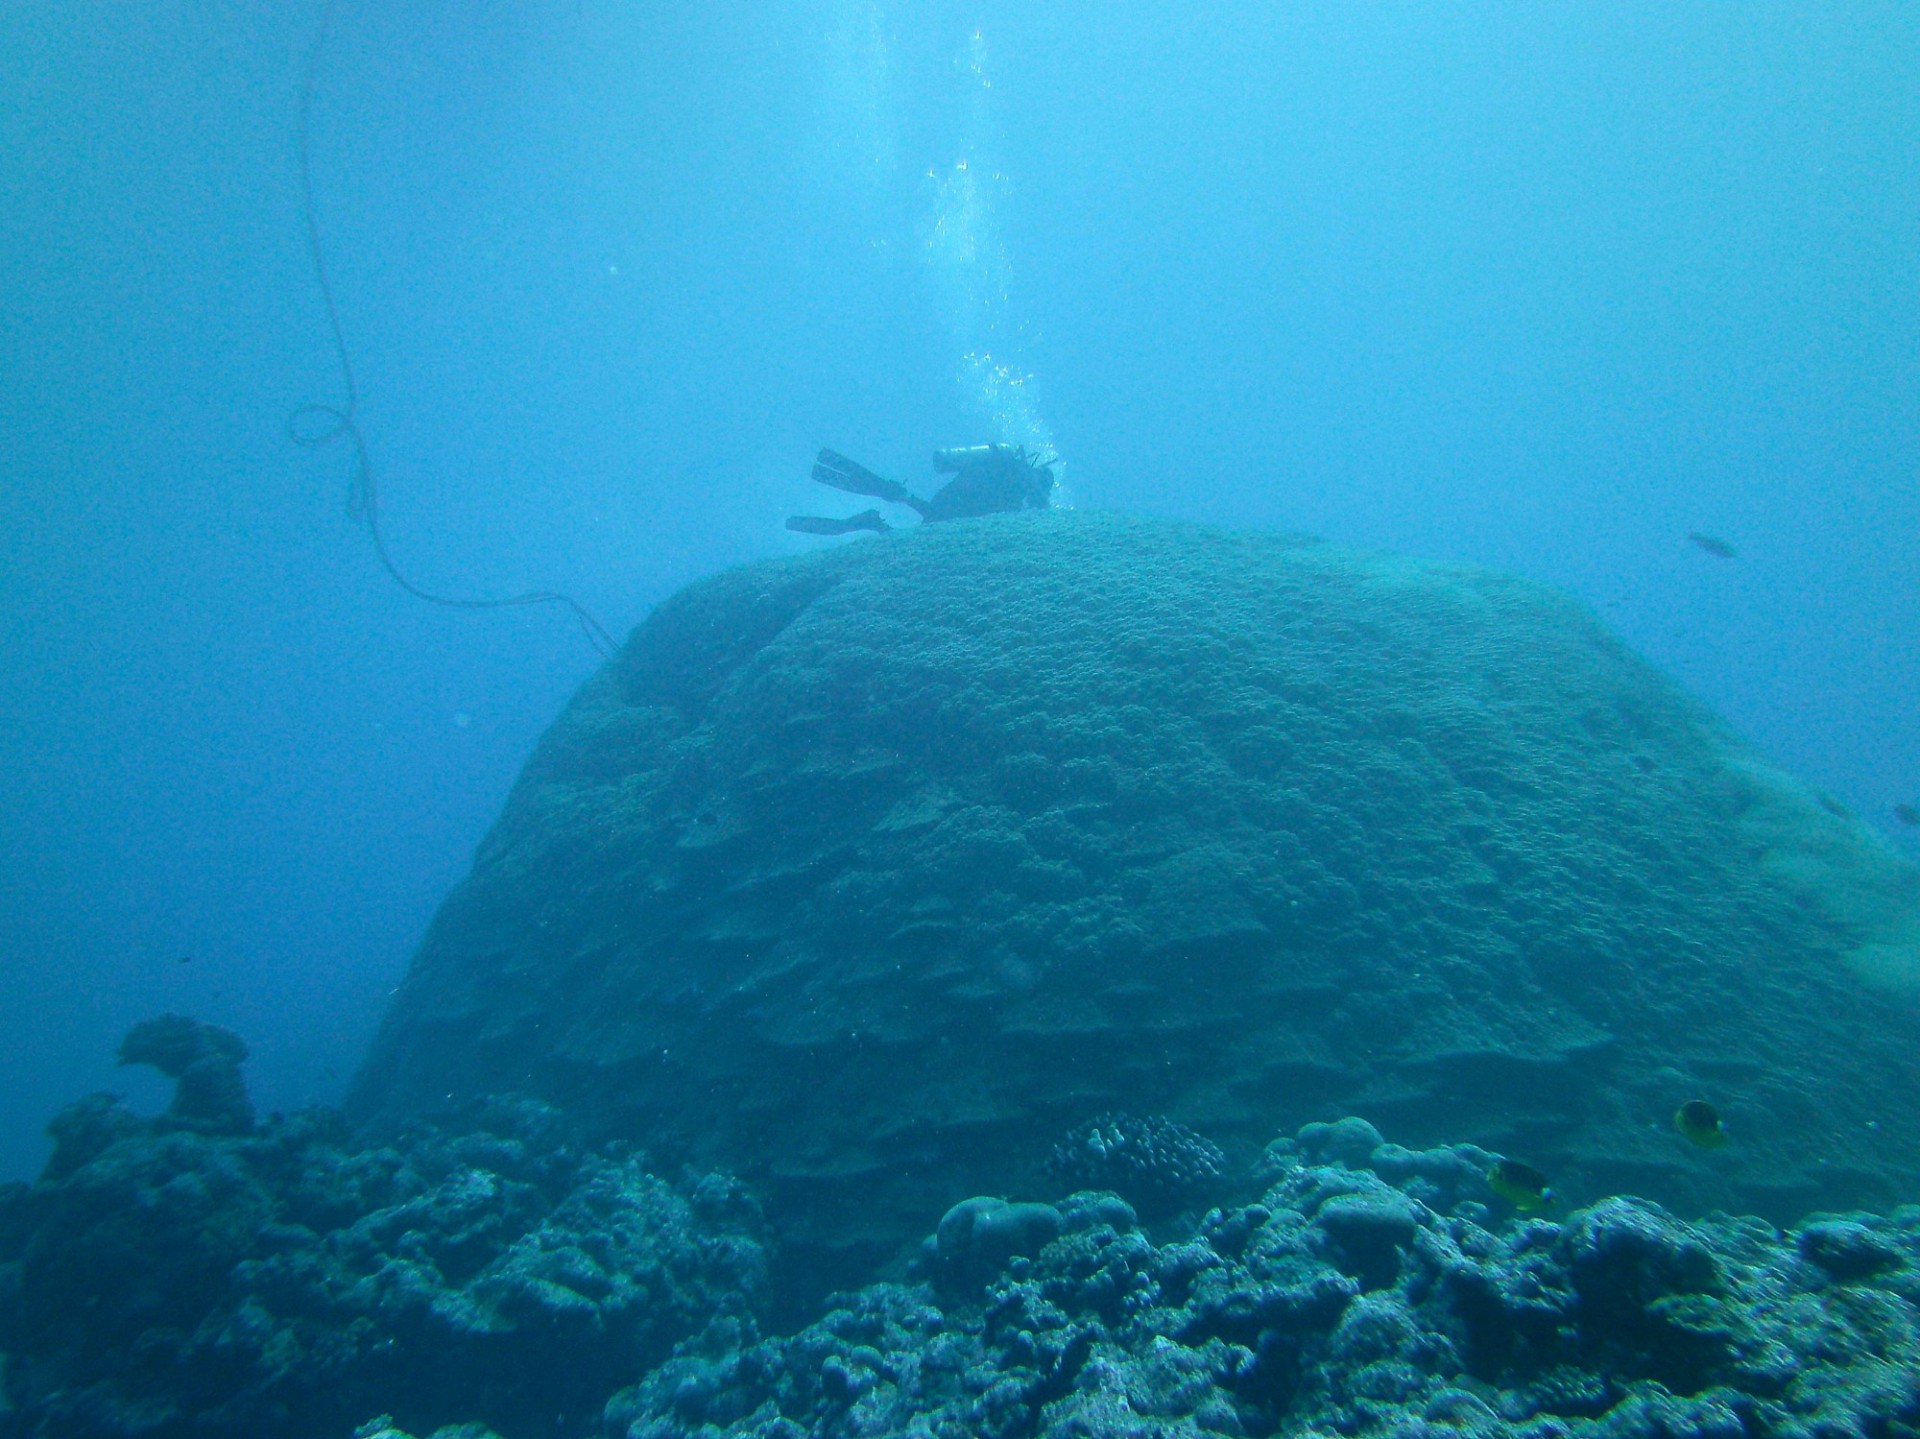 A scientist surveys a large Porites coral colony in American Samoa, which is located in the South Pacific Convergence Zone (SPCZ) and impacted by the SPCZ zonal events Linsley et al. reconstructed using similar corals from Indonesia’s Makassar Strait. (Photo: Brad Linsley)